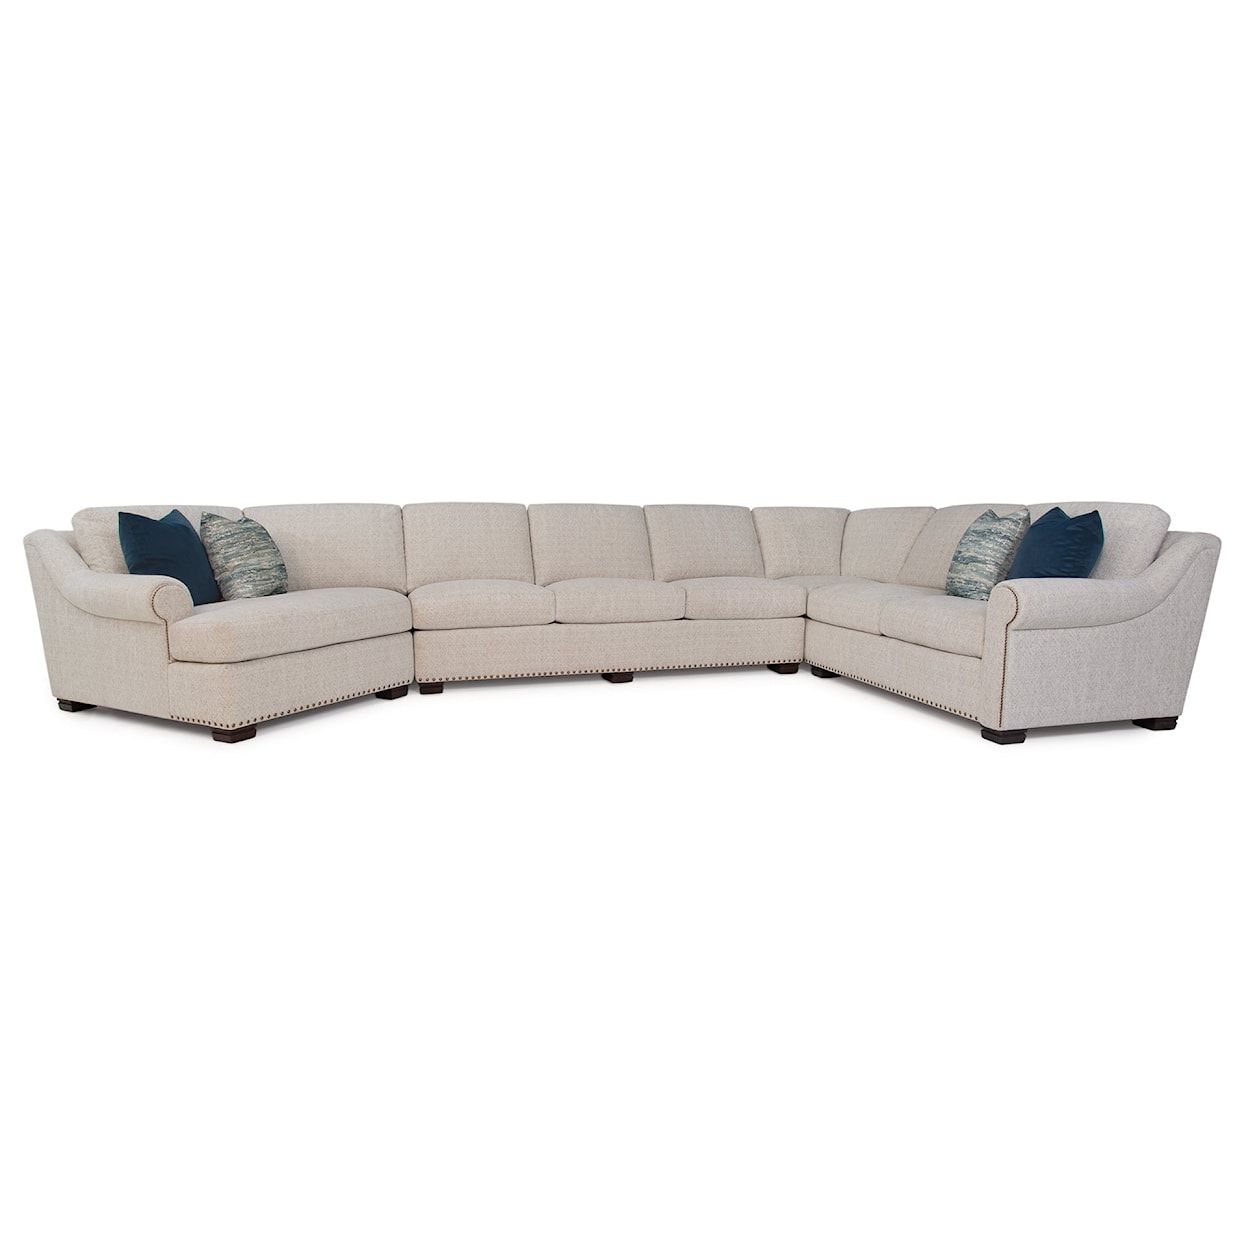 Smith Brothers 9000 Sectional Sofas